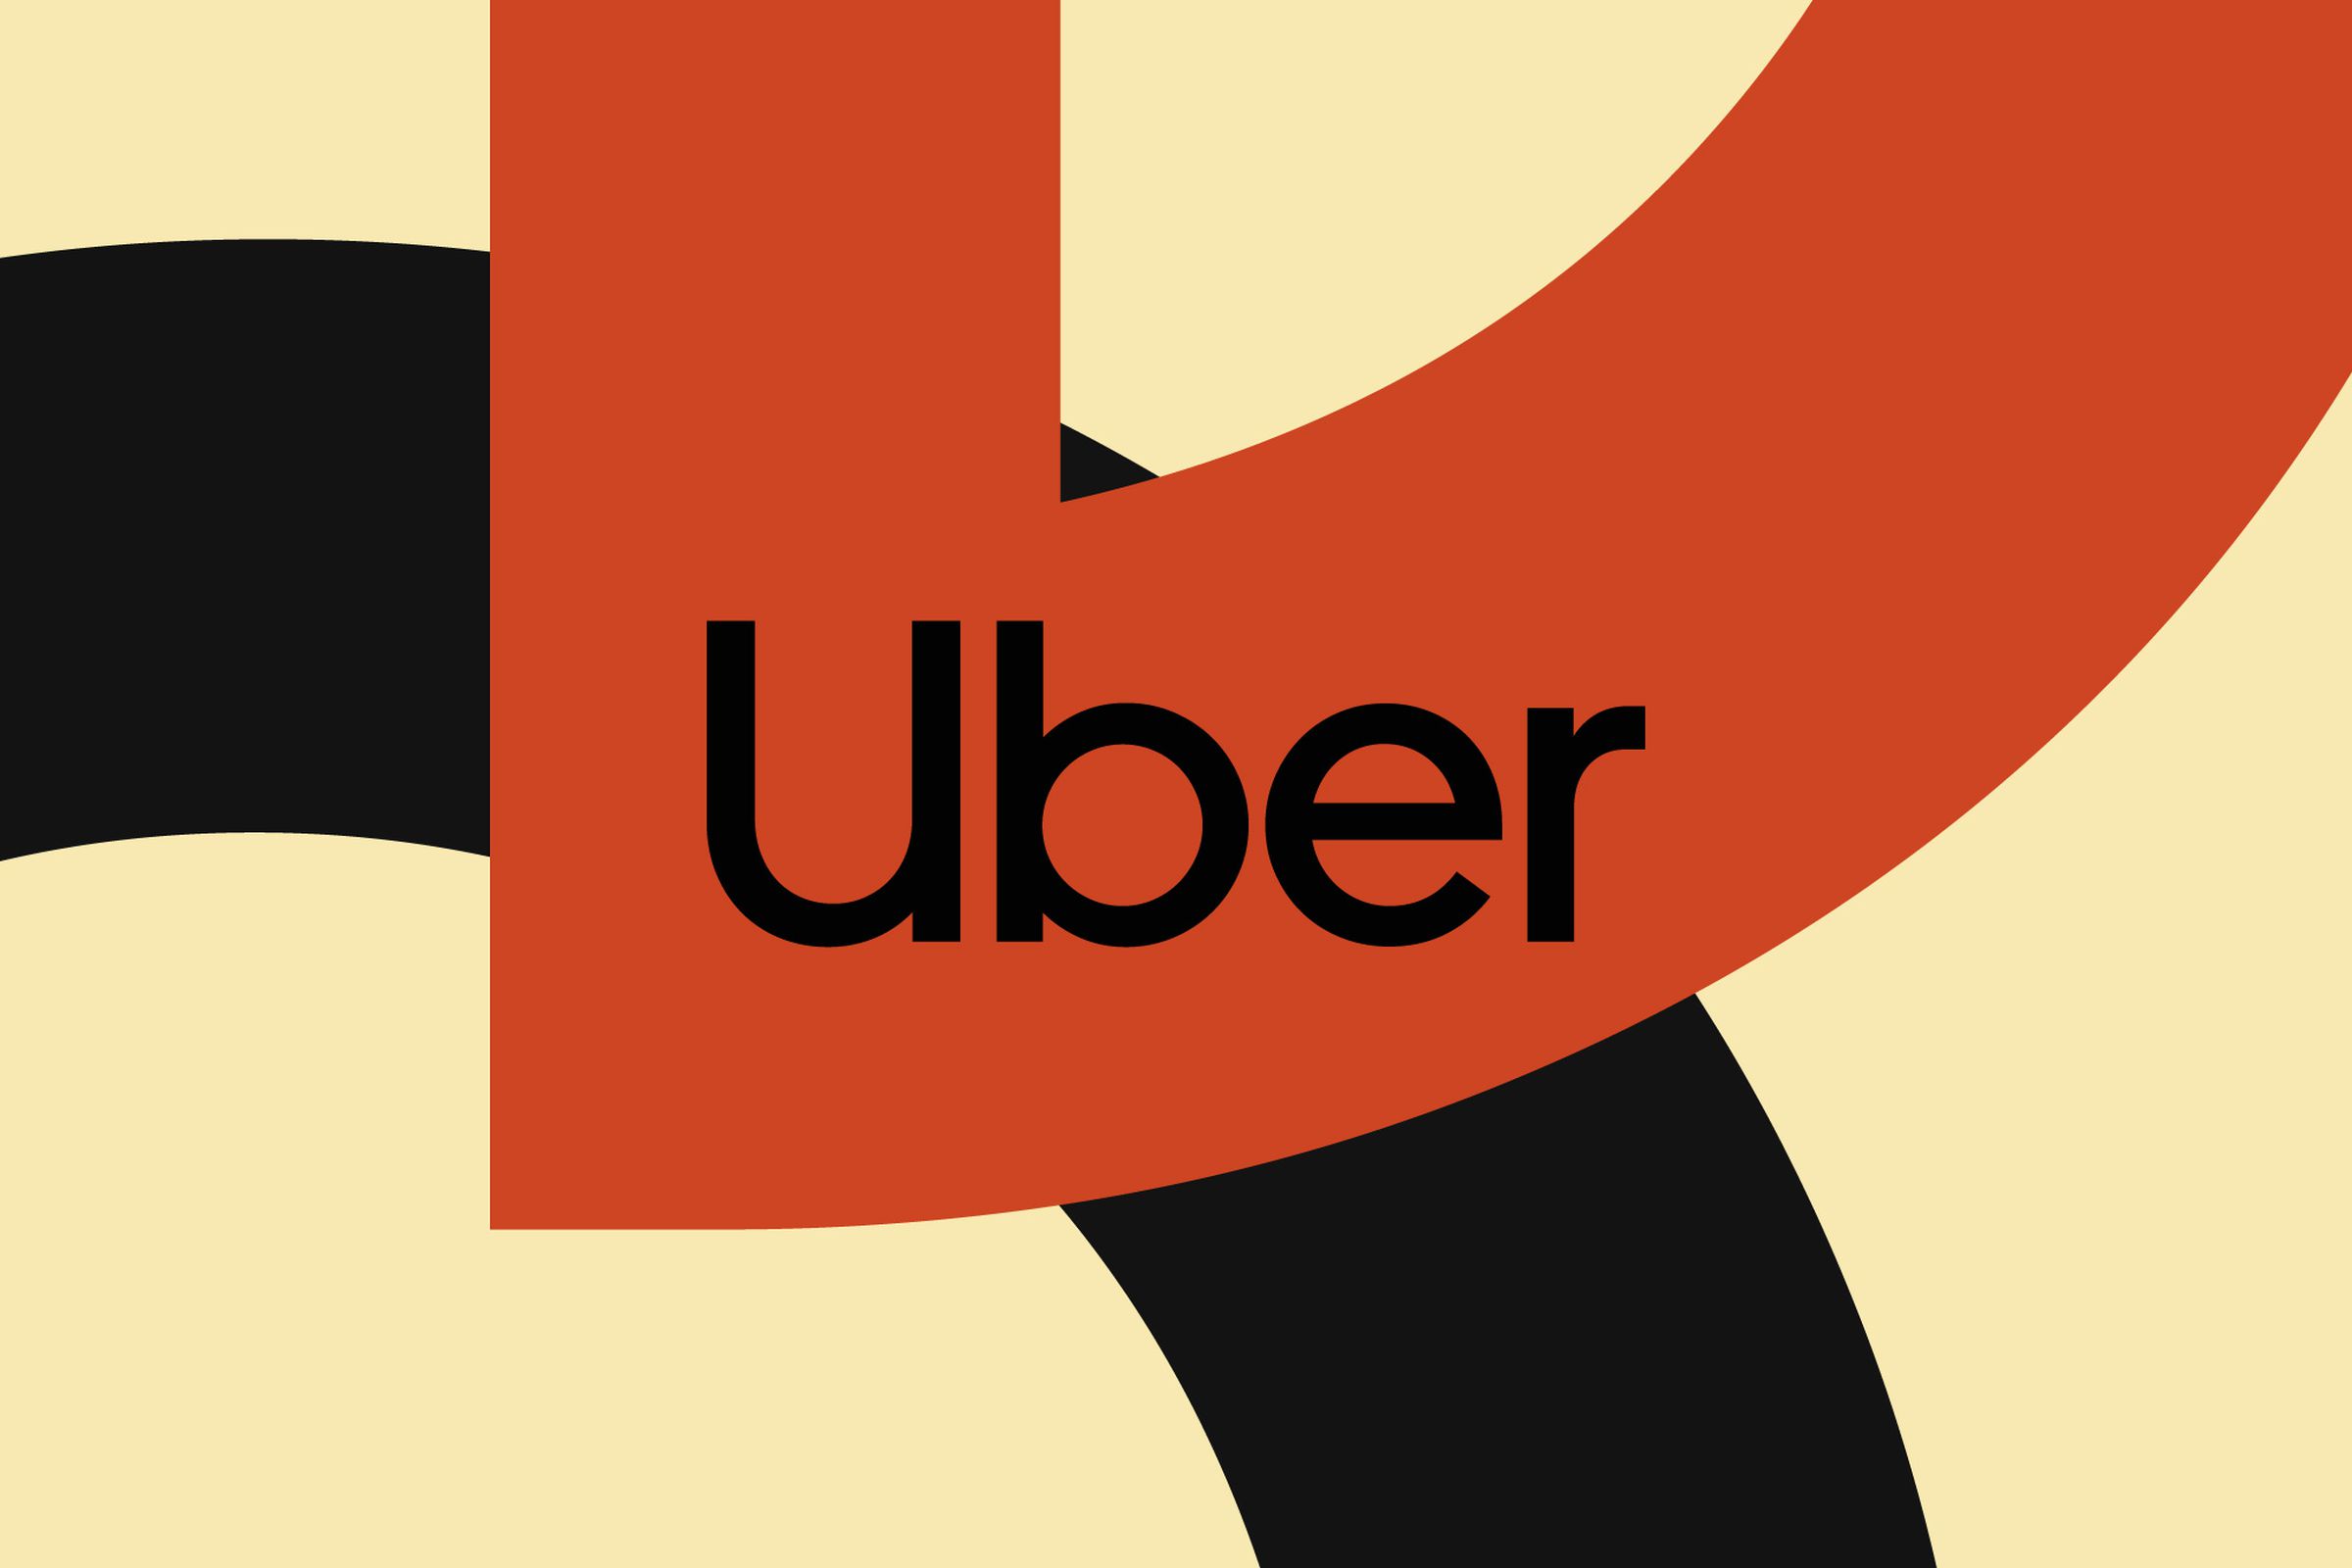 The&nbsp;Uber&nbsp;logo with a black and red graphic against a yellow background.